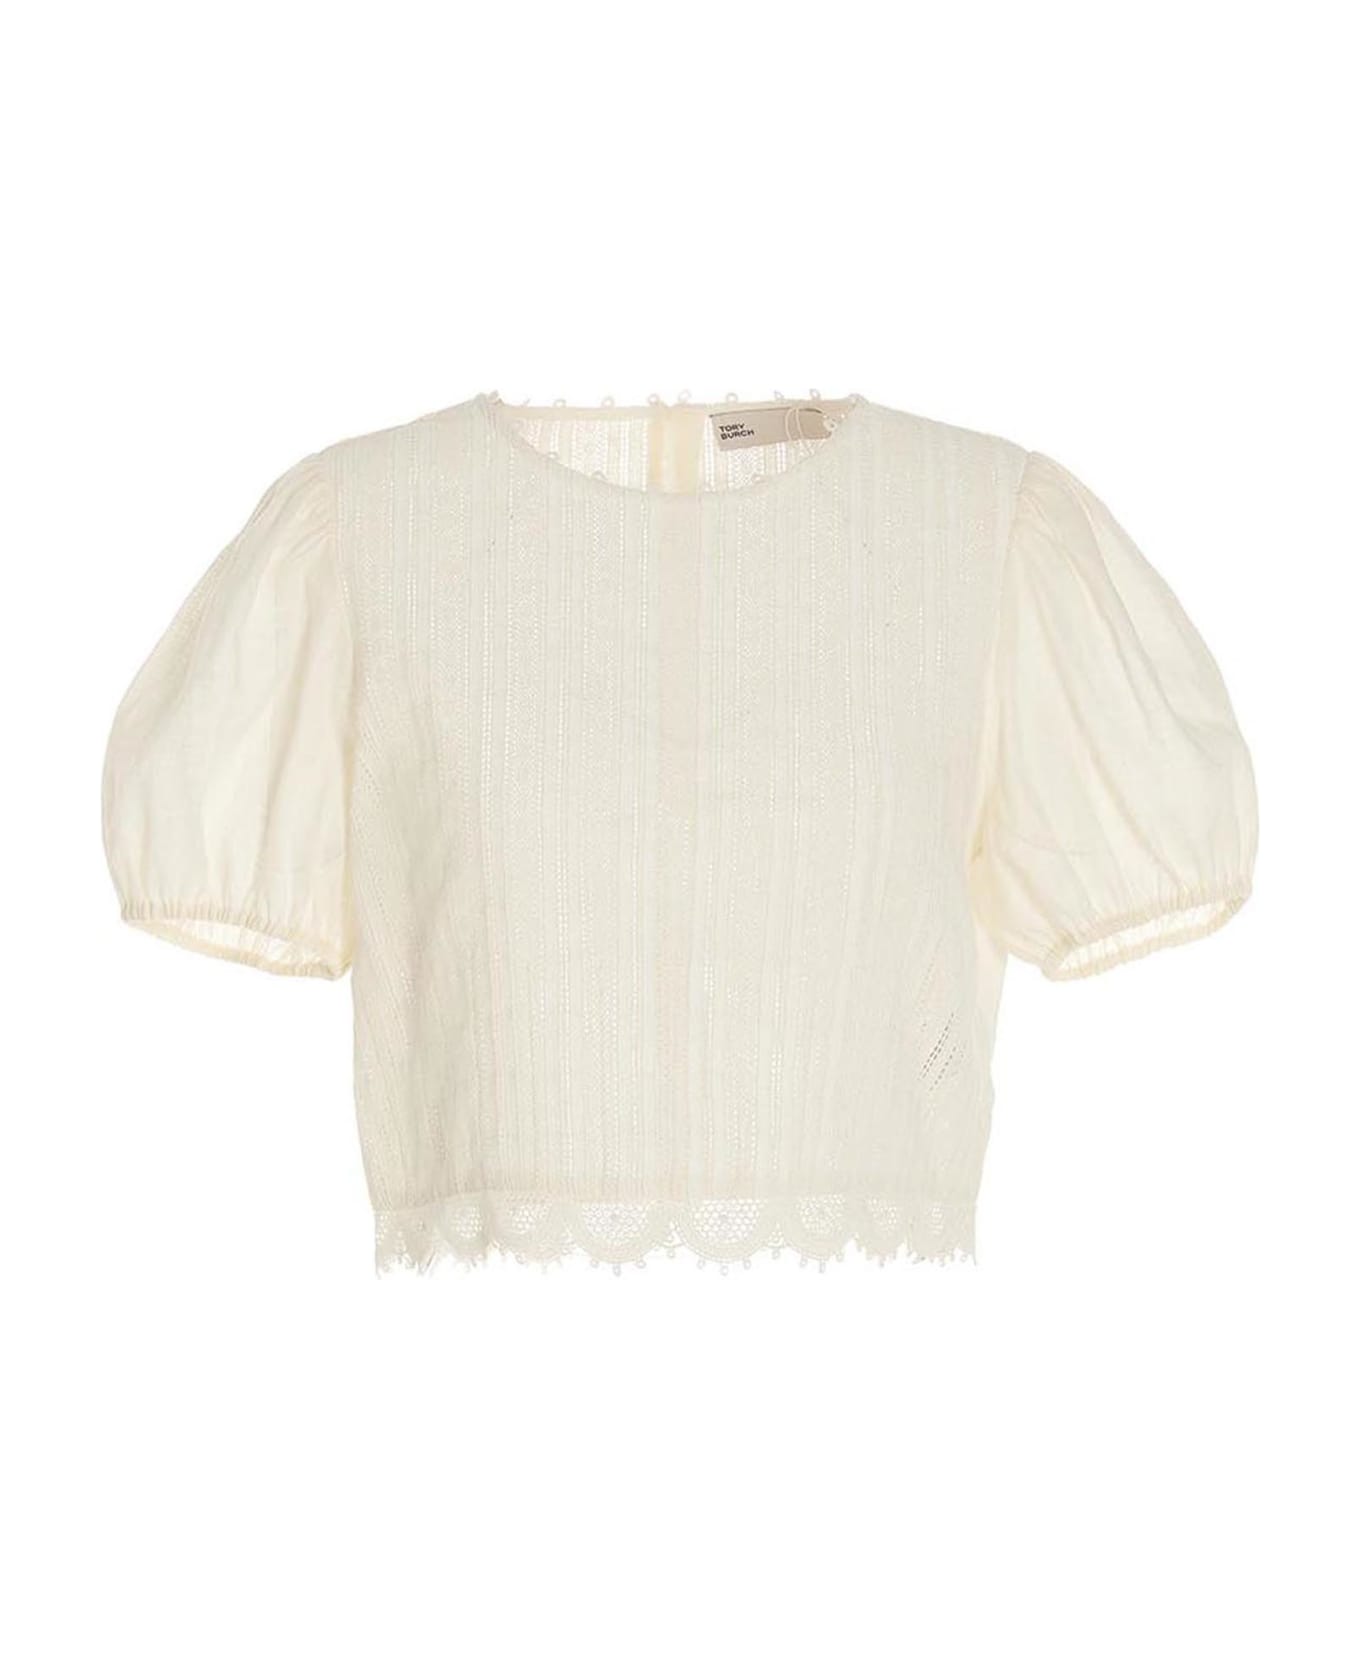 Tory Burch Lace Top | italist